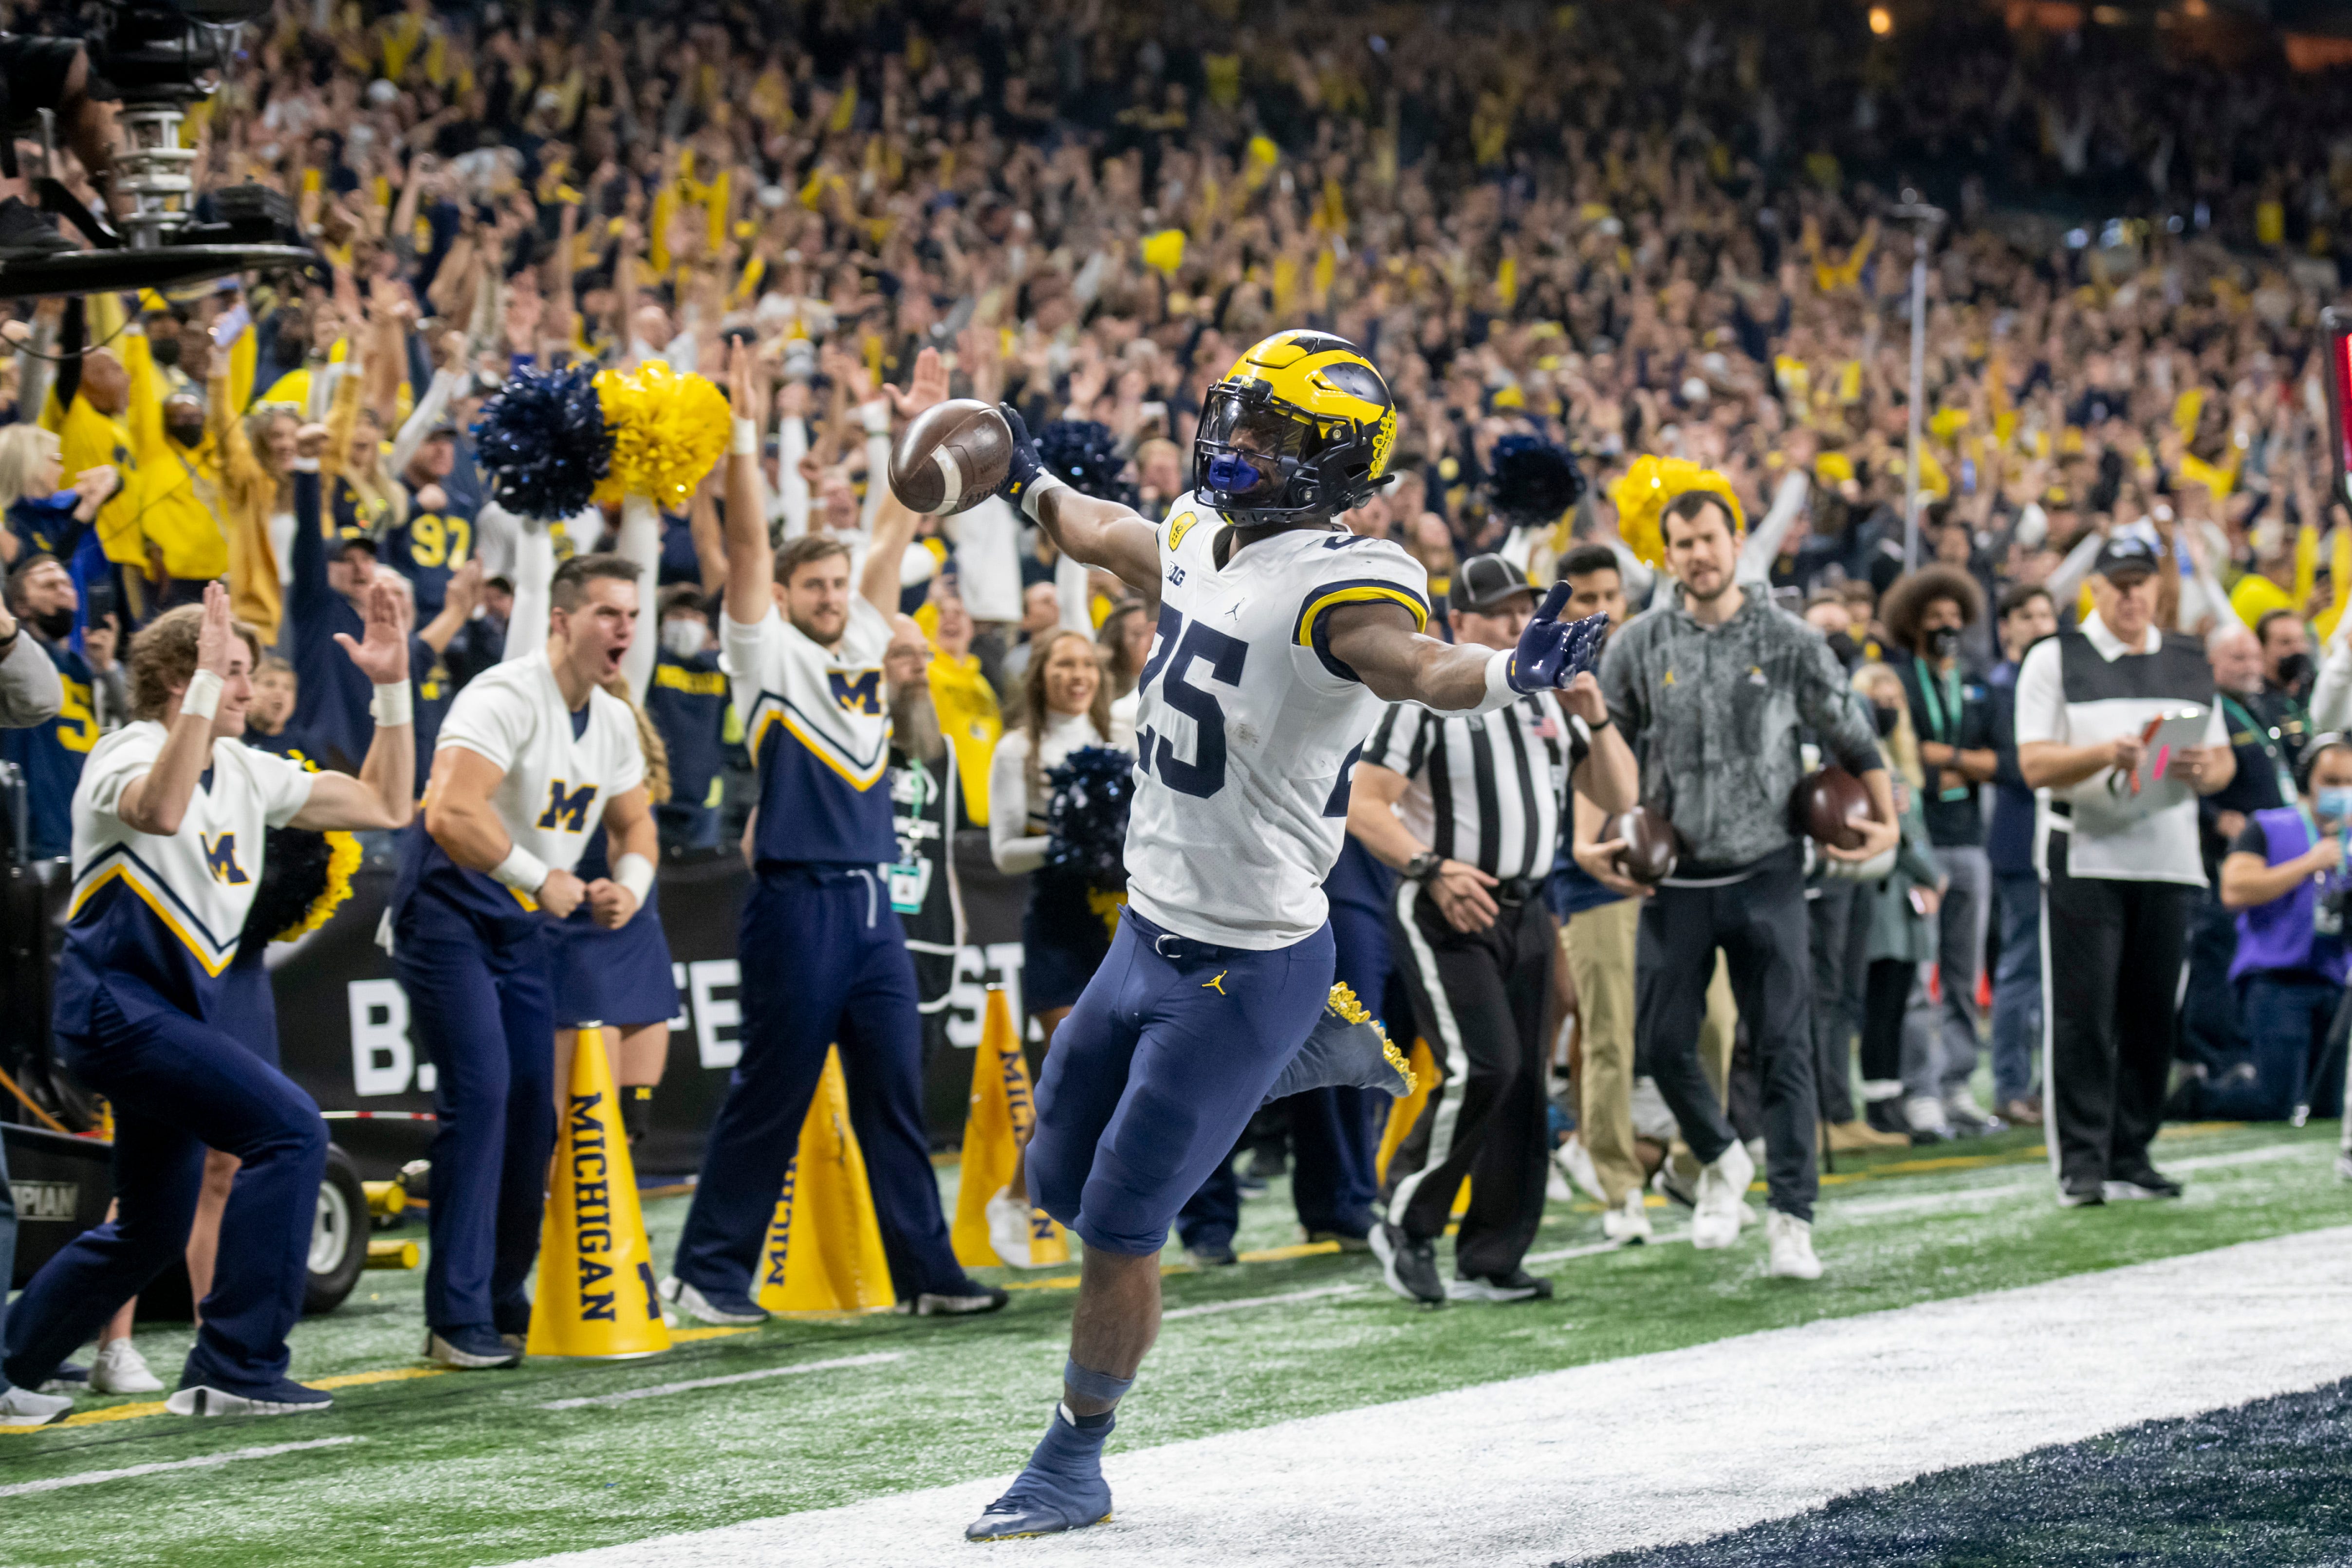 Michigan running back Hassan Haskins celebrates after scoring a touchdown during the third quarter.